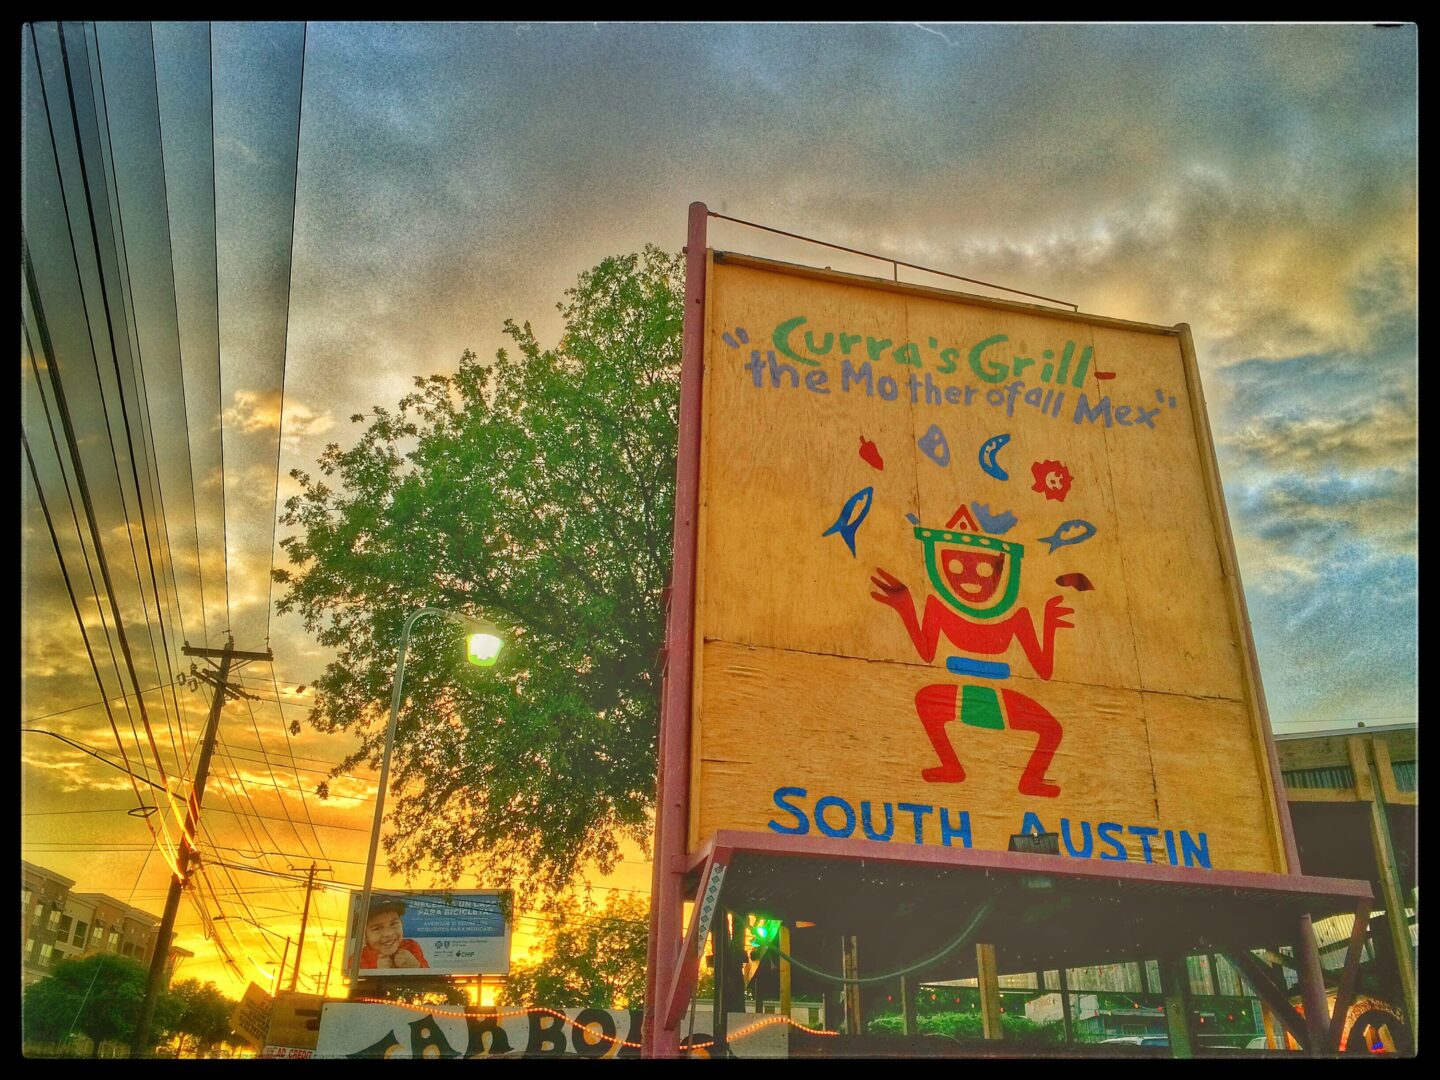 A sign that says south austin at sunset.